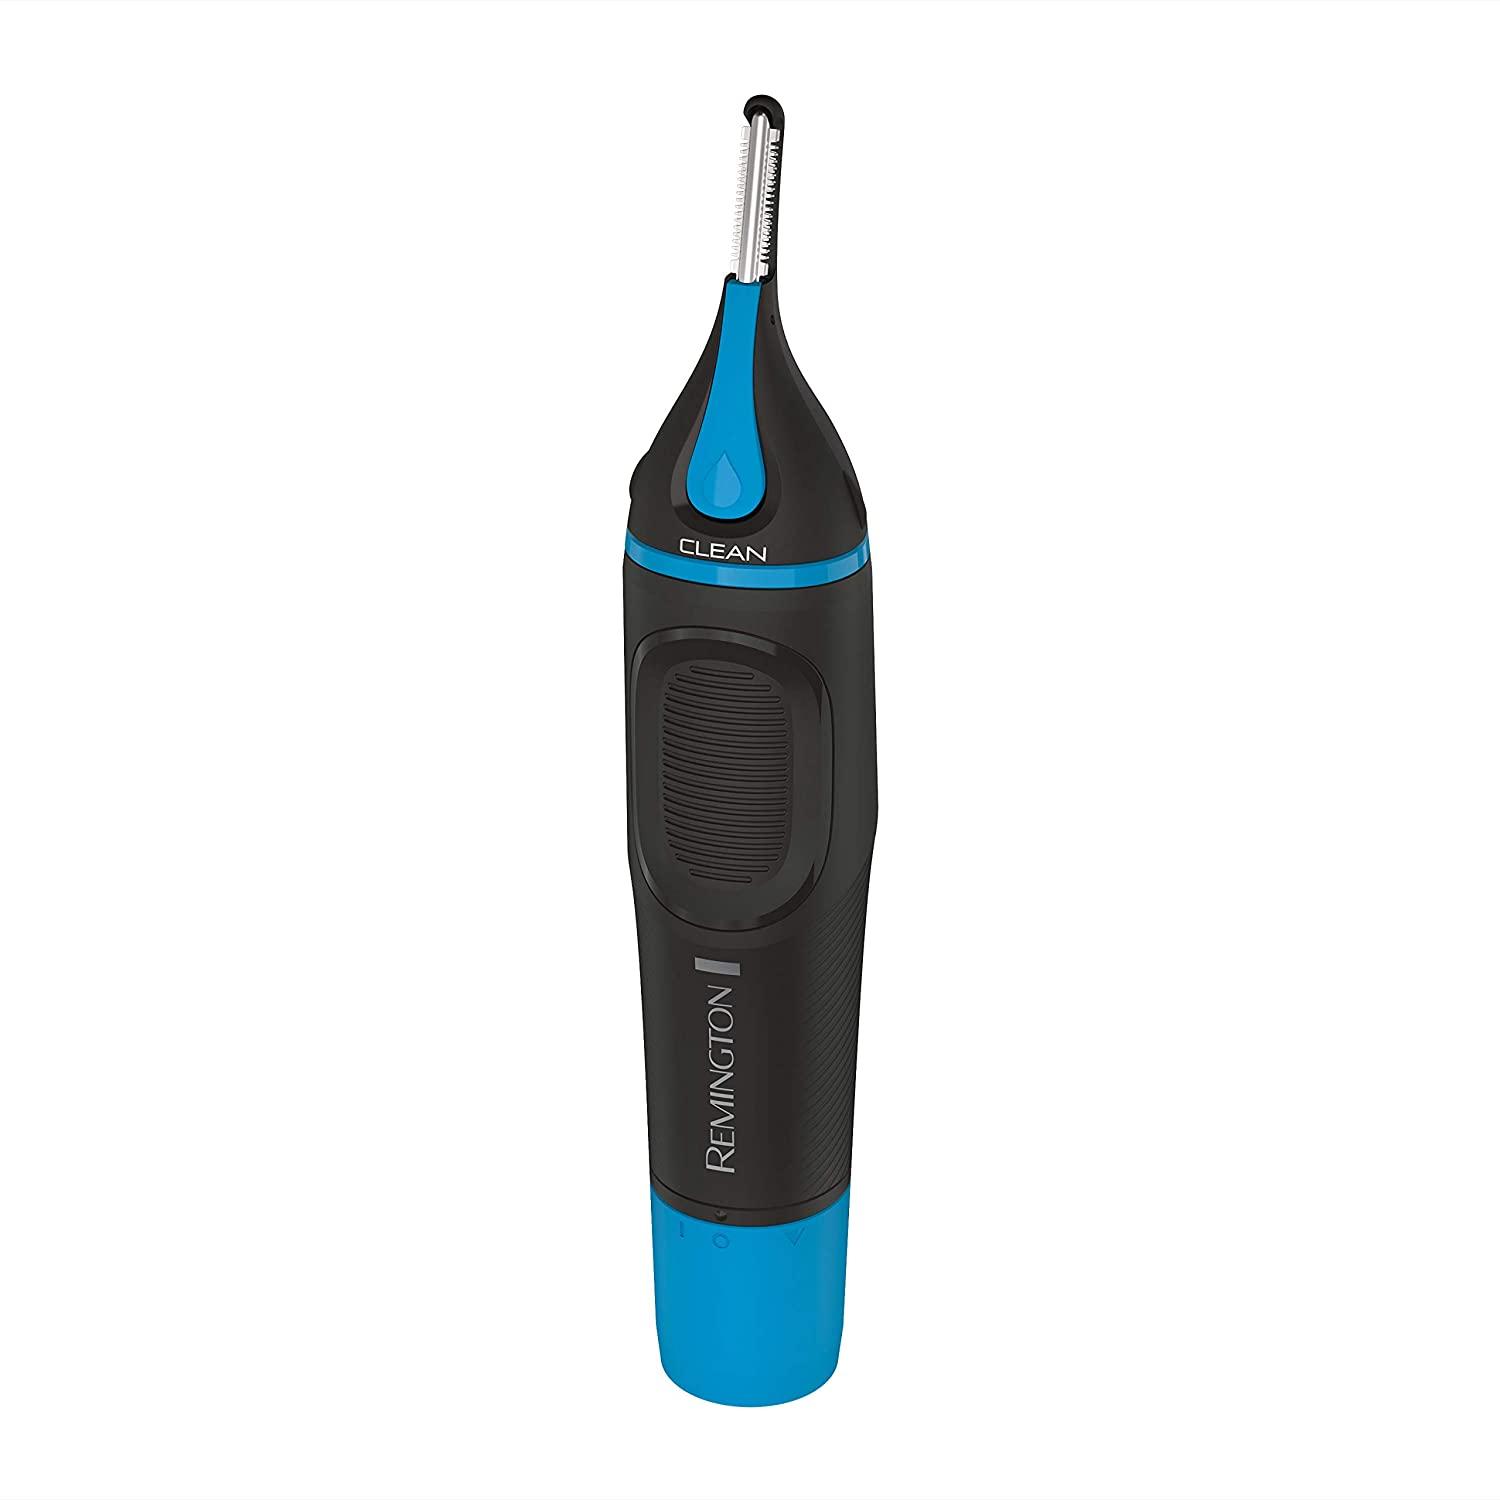 Remington Nose Ear and Detail Trimmer for $5.75